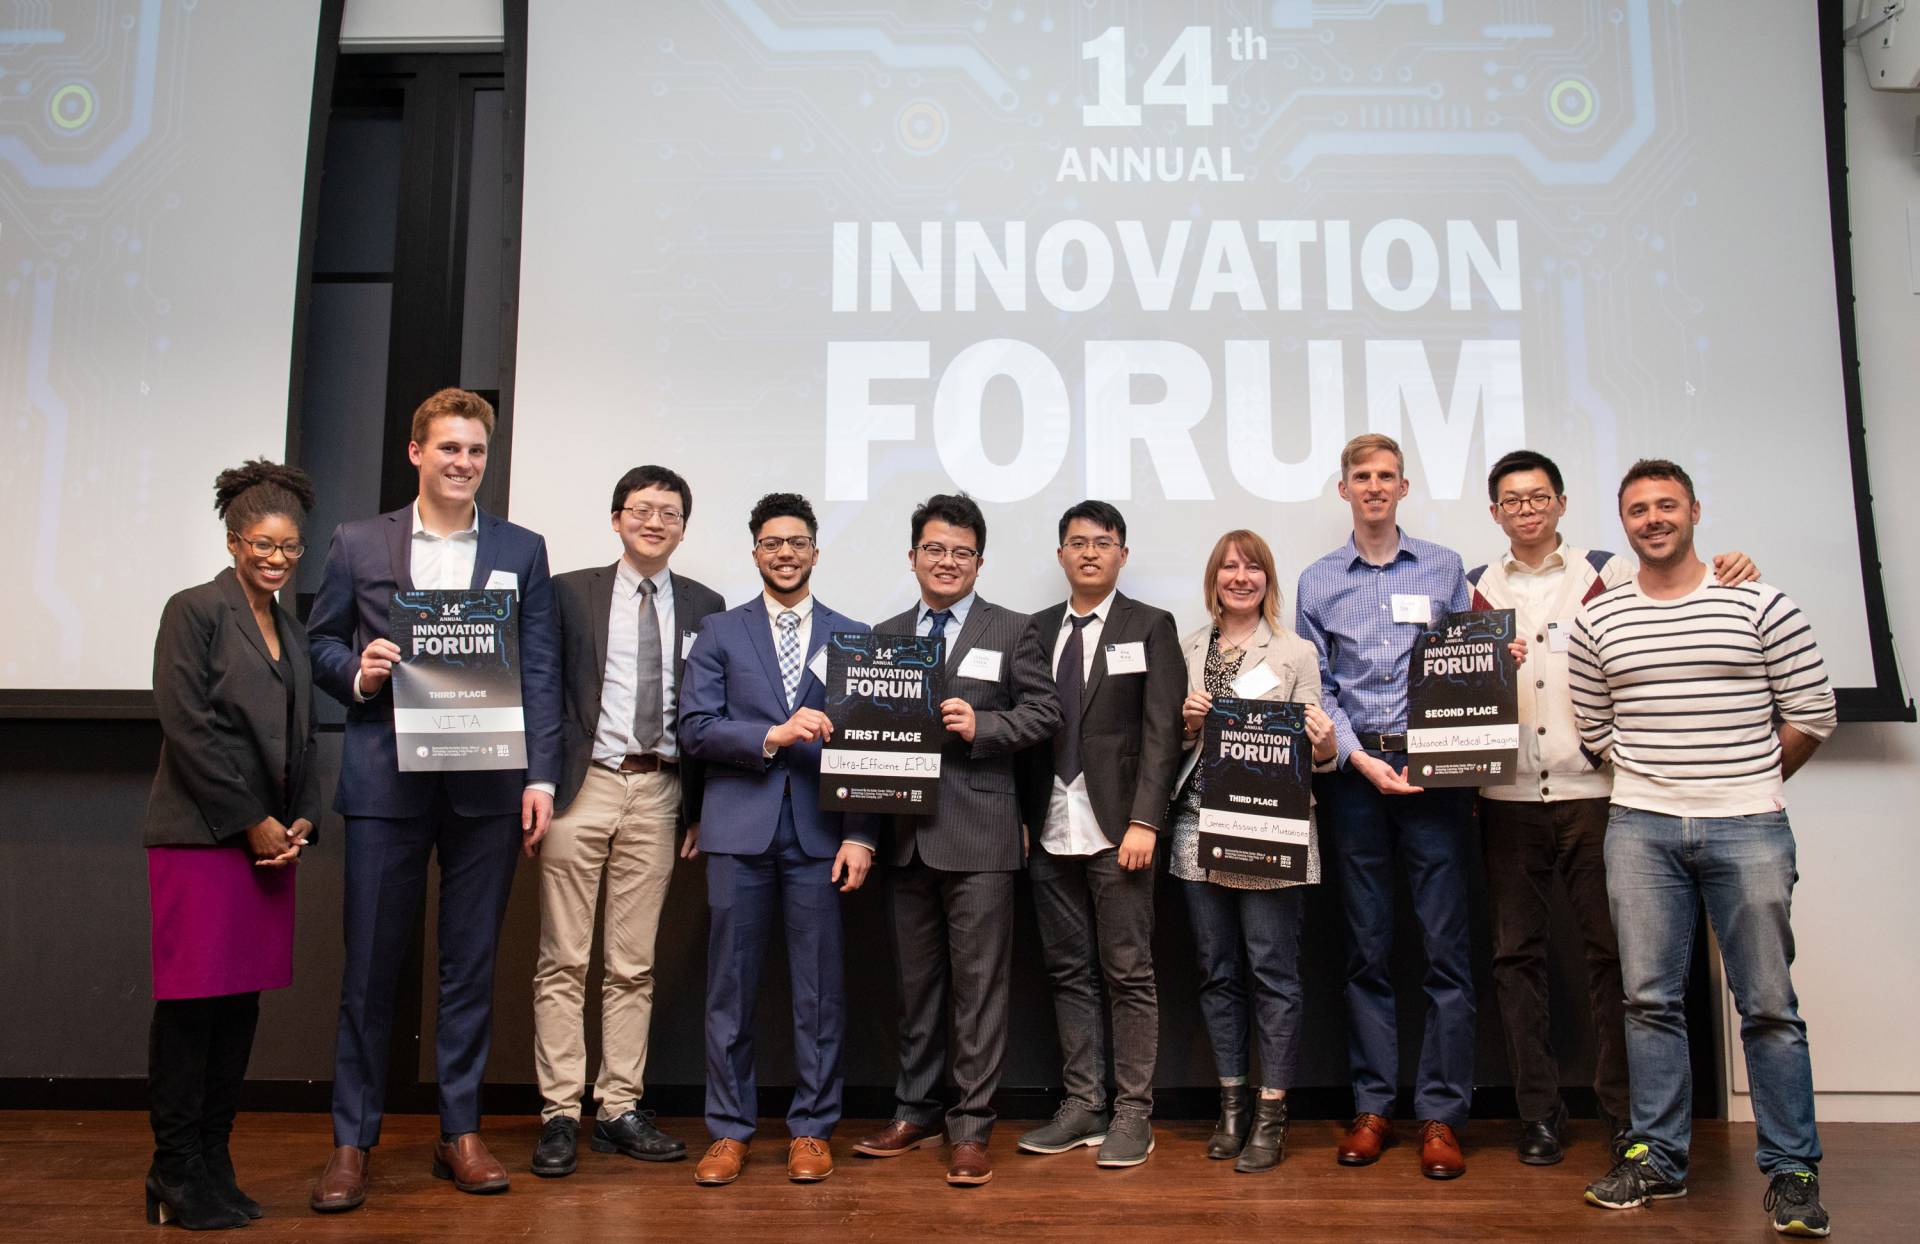 The winners on stage at the Innovation Forum